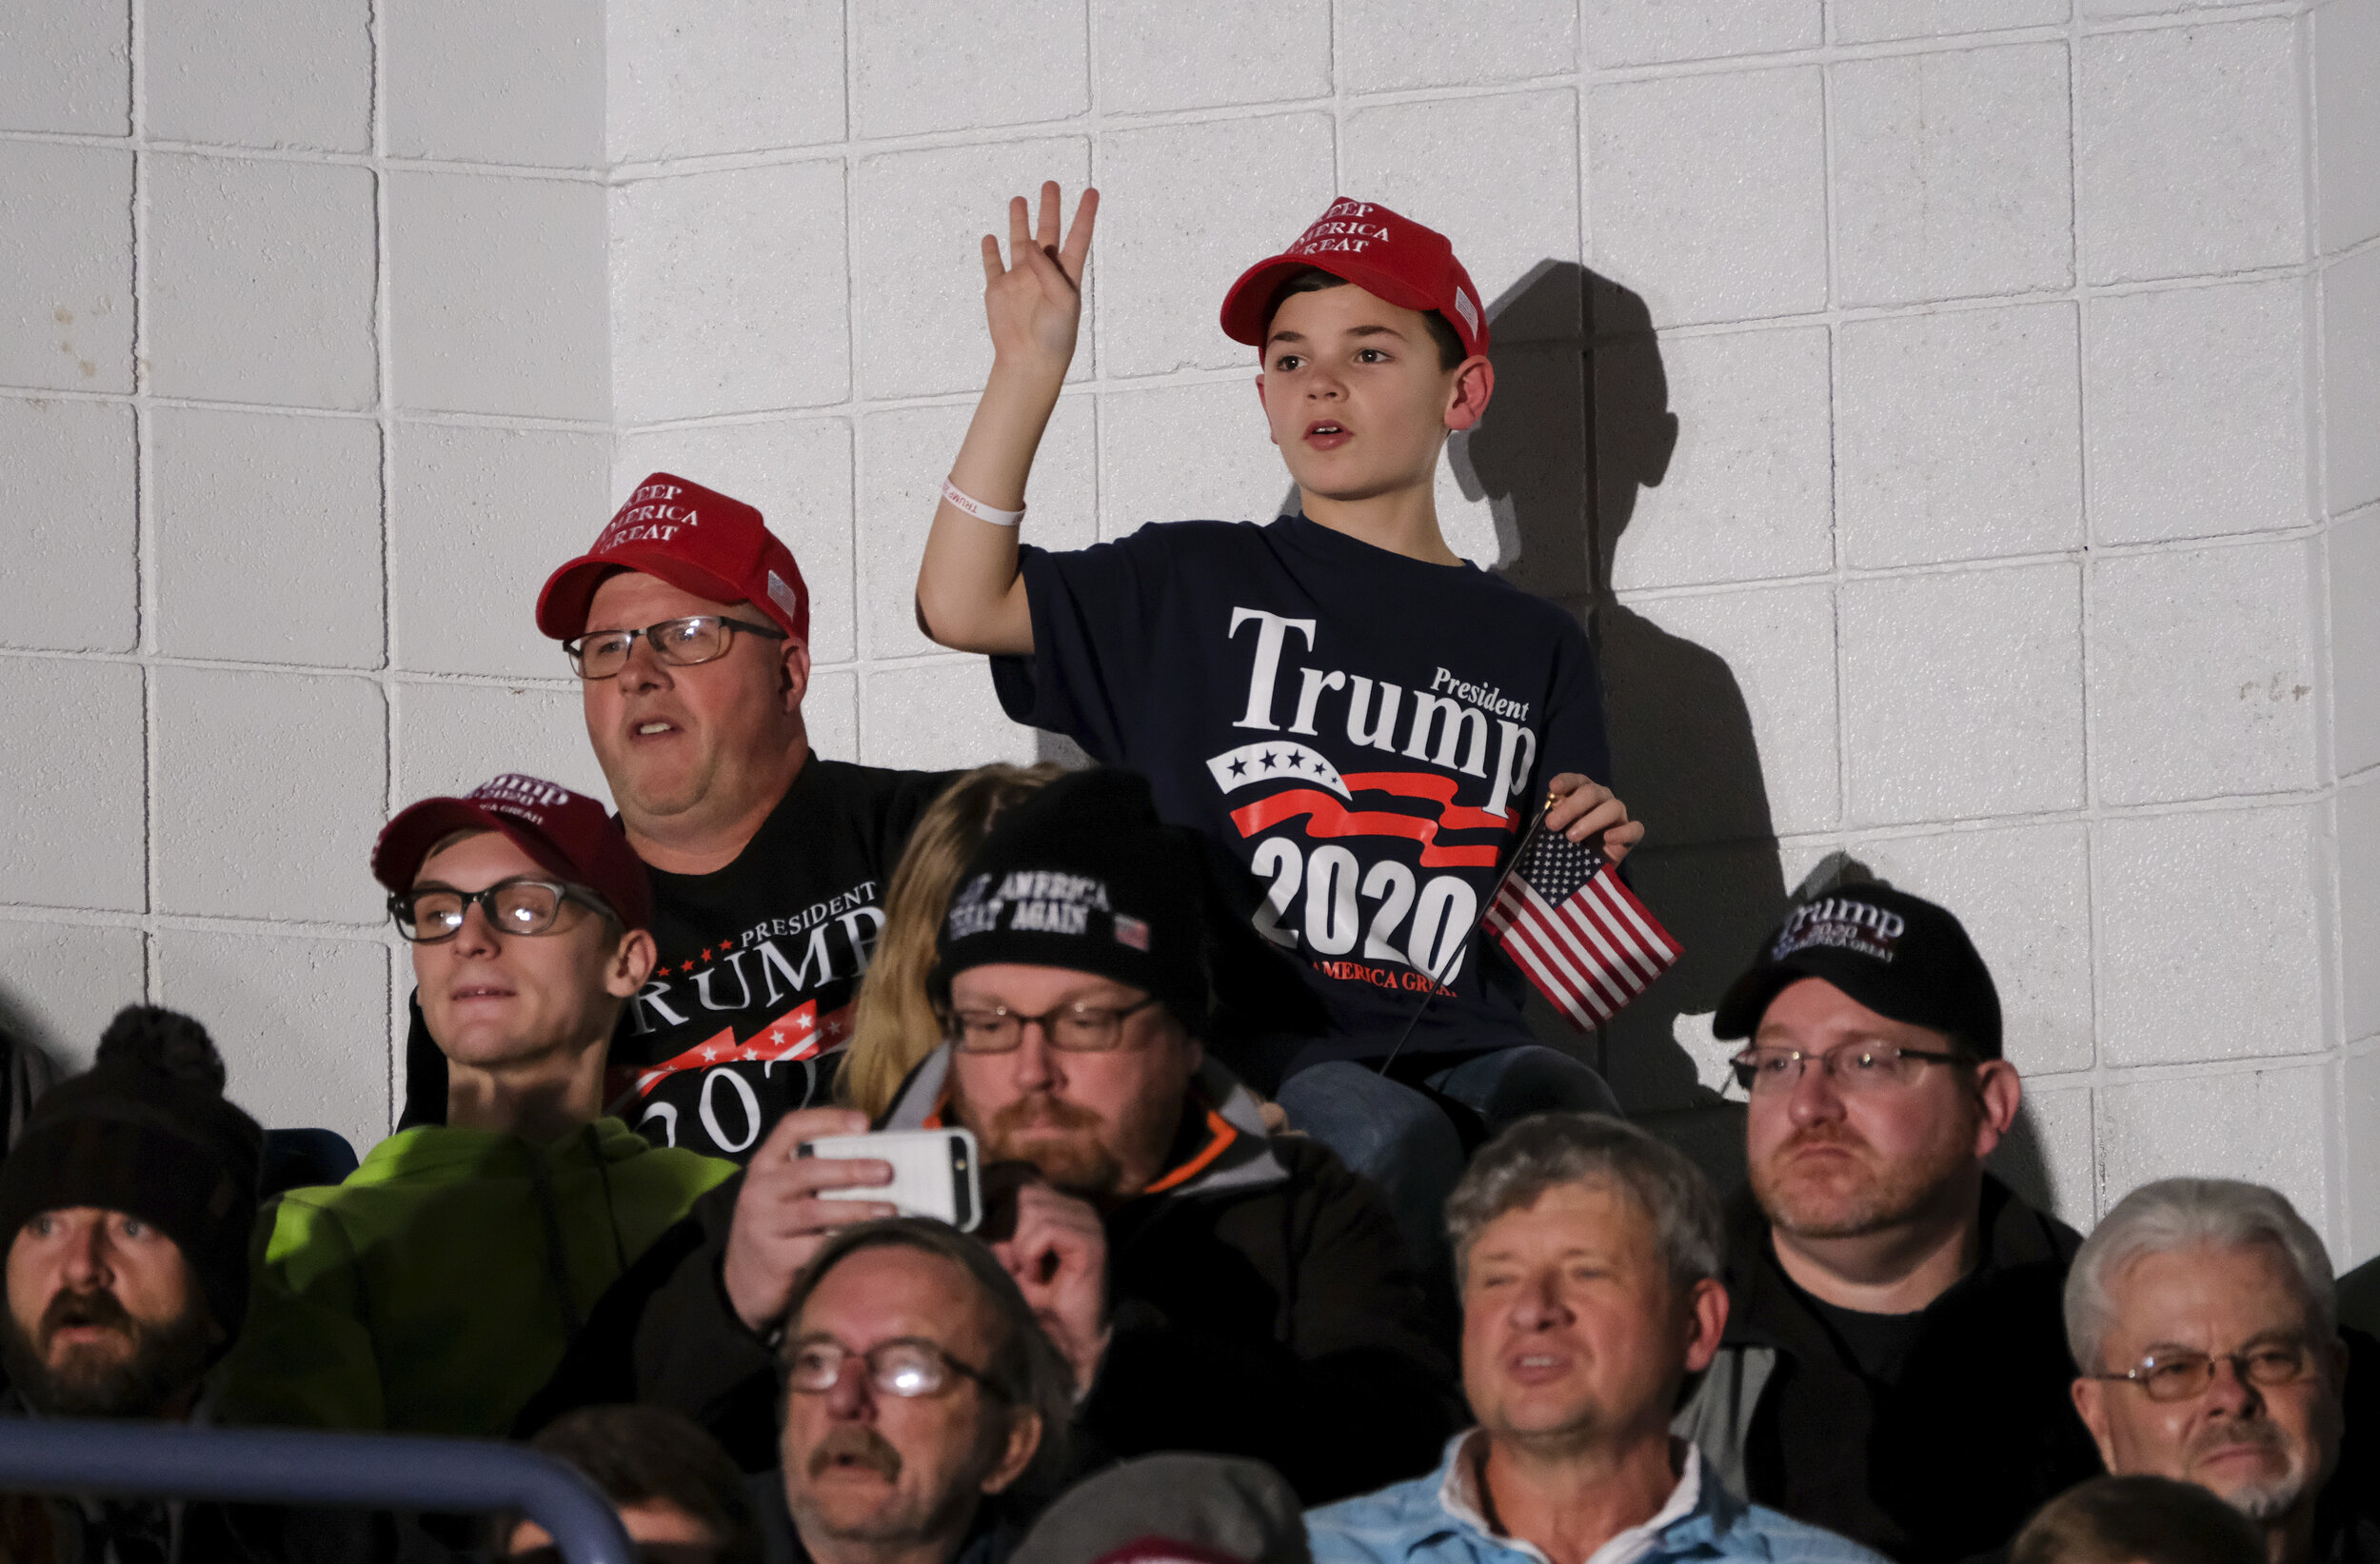  A young Trump supporter joins in a mass chant of ‘Four more years’ during a Trump rally held in Battle Creek, Michigan on December 8, 2020. 